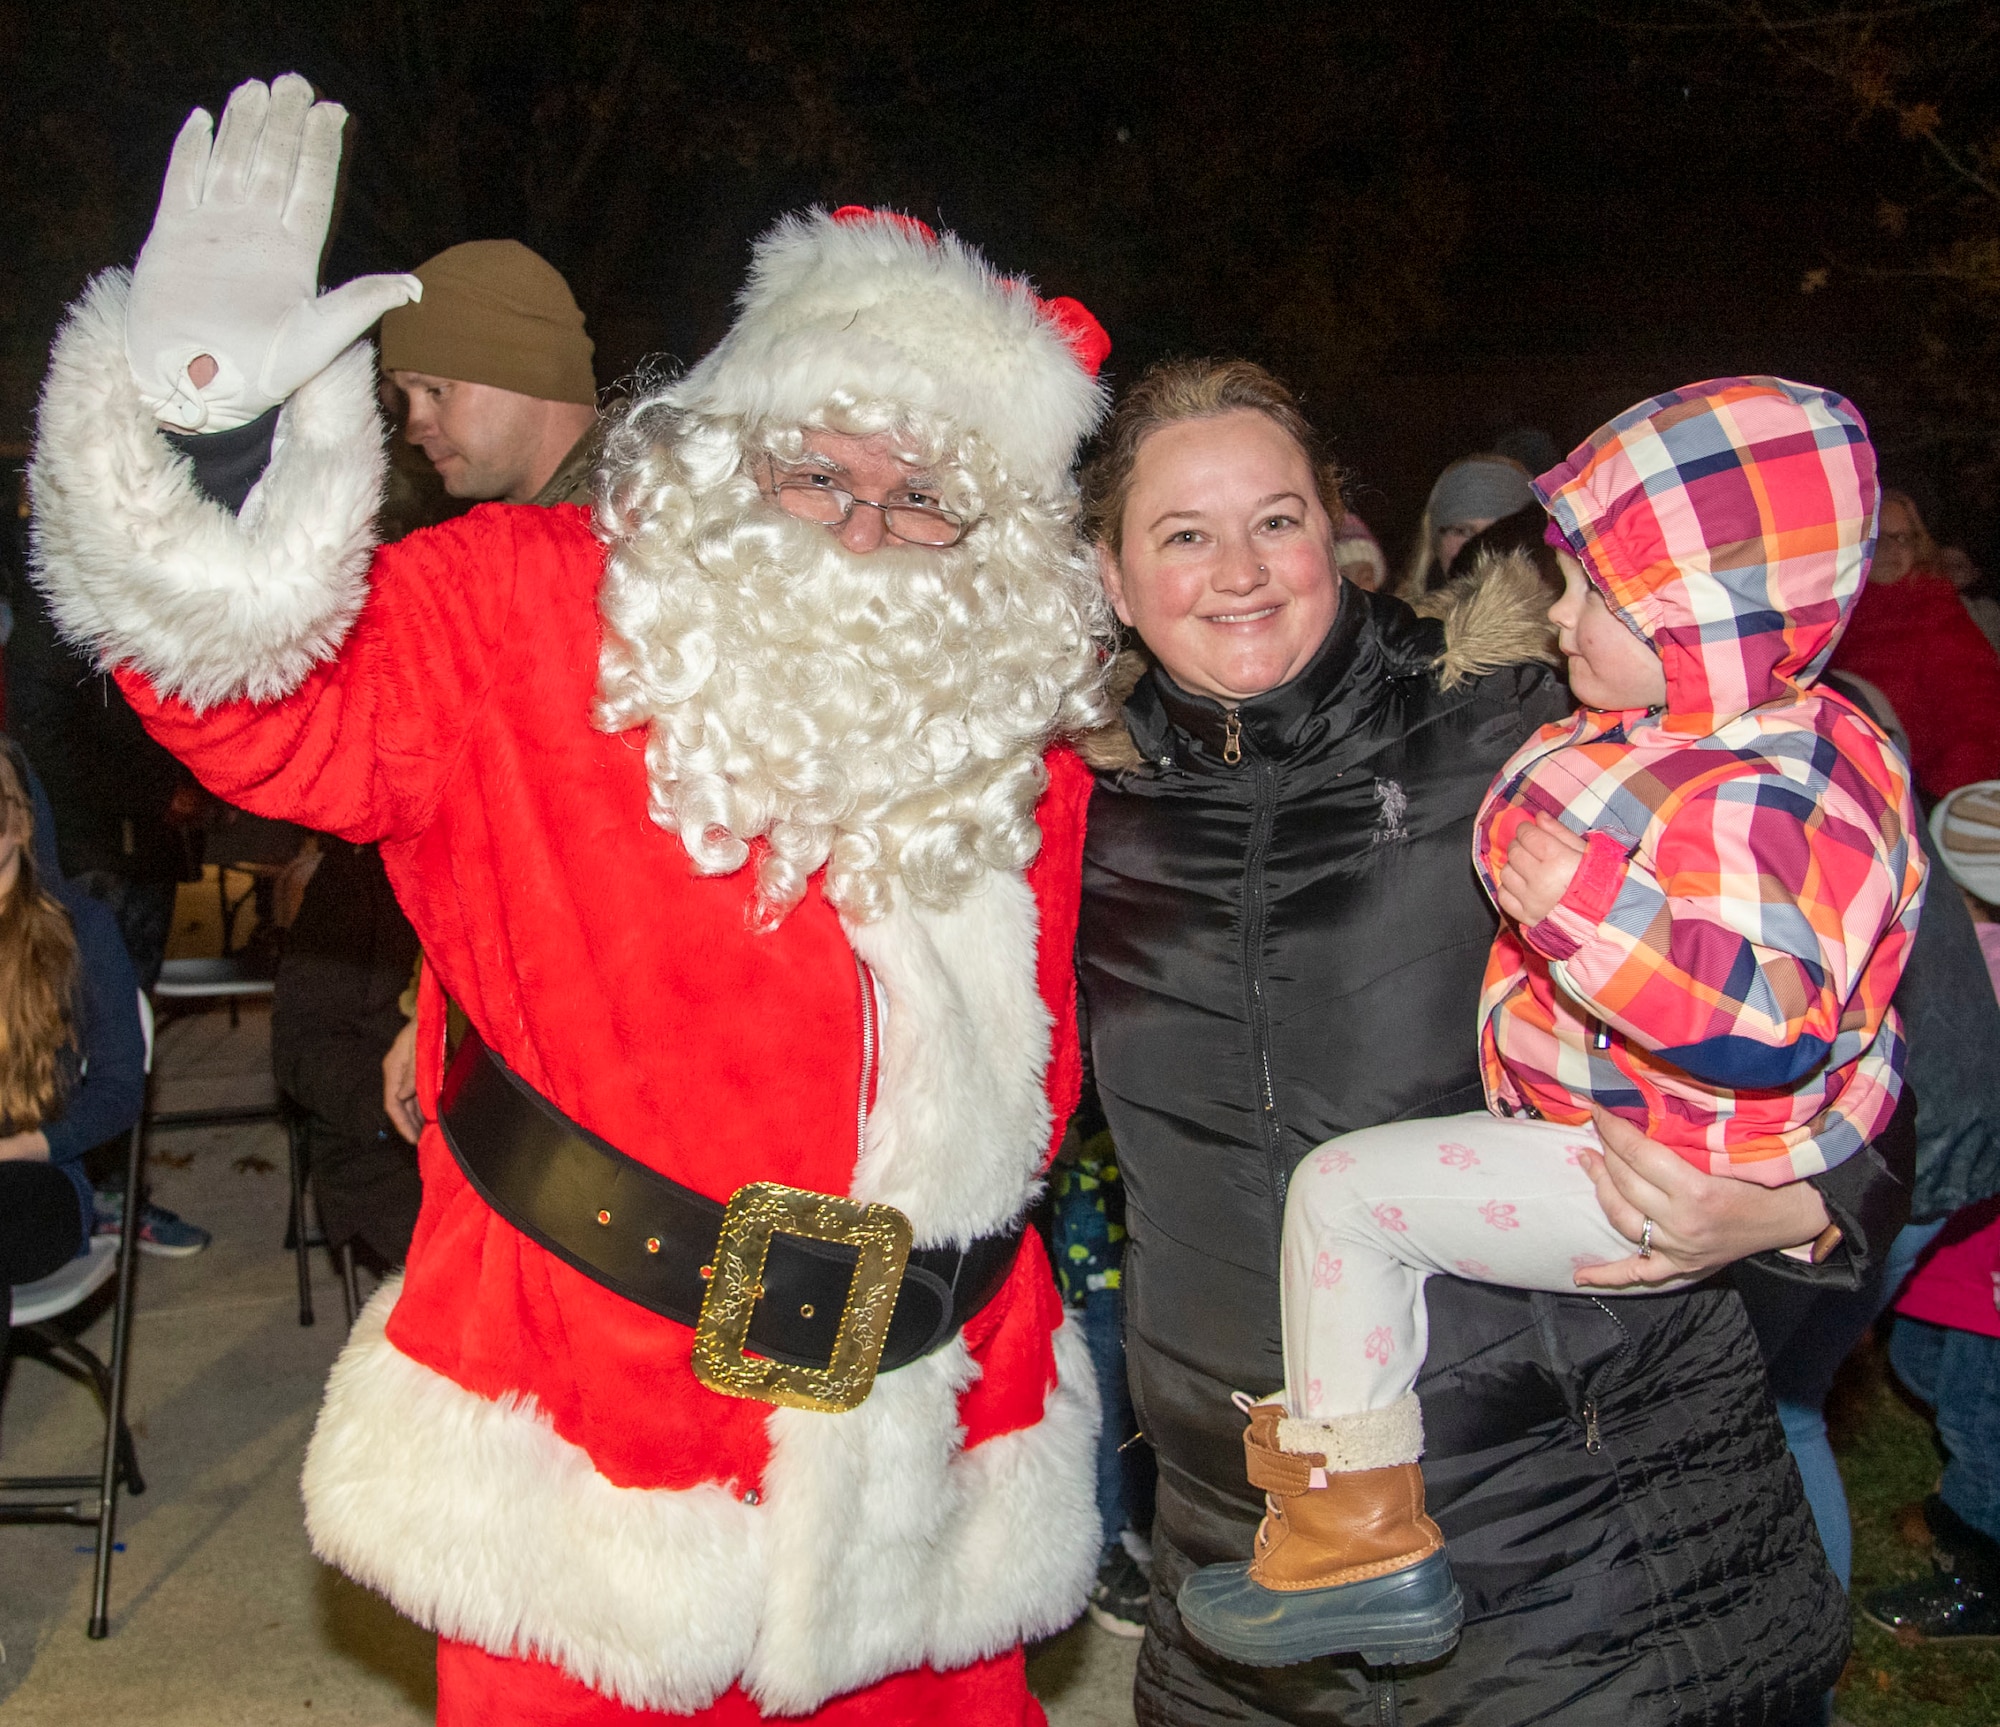 Kayla Hansen, middle, and her daughter, Lila, pose for a photo with Santa Claus during the annual Holiday Parade and Tree Lighting Ceremony at Dover Air Force Base, Delaware, Dec. 1, 2021. The annual ceremony marks the start of the holiday season at Dover AFB. (U.S. Air Force photo by Tech. Sgt. Nicole Leidholm)